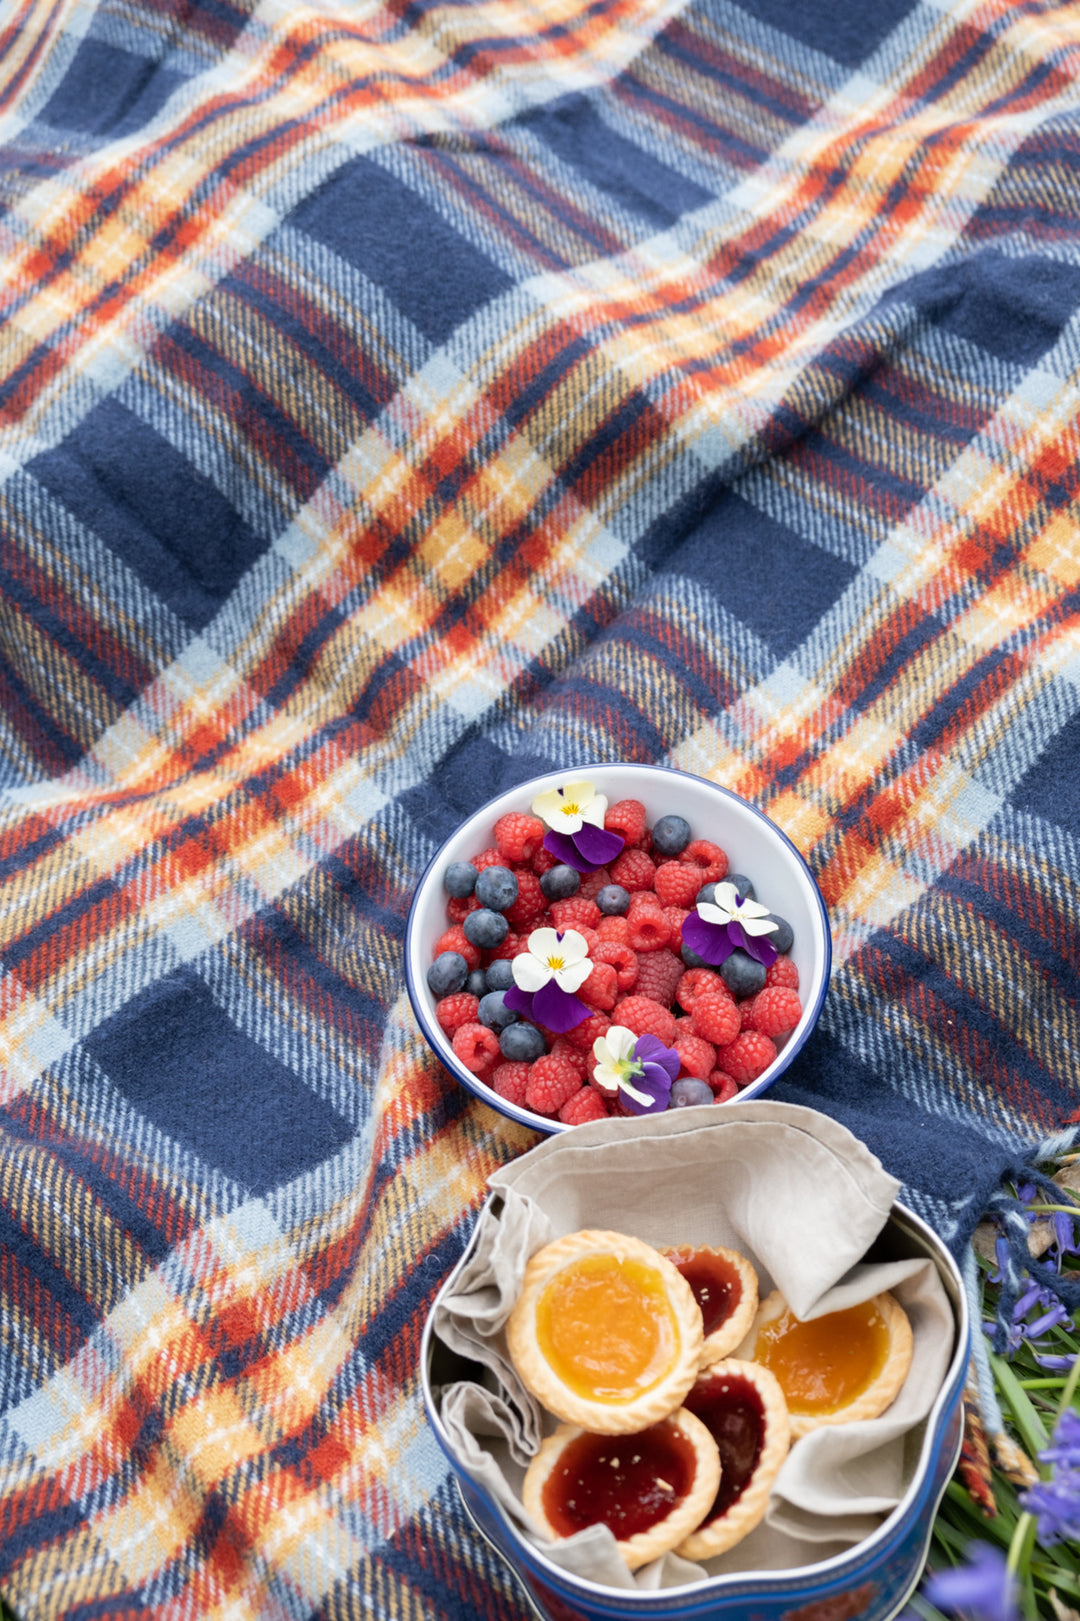 Multi-coloured wool picnic rug underneath a bowl of berries.